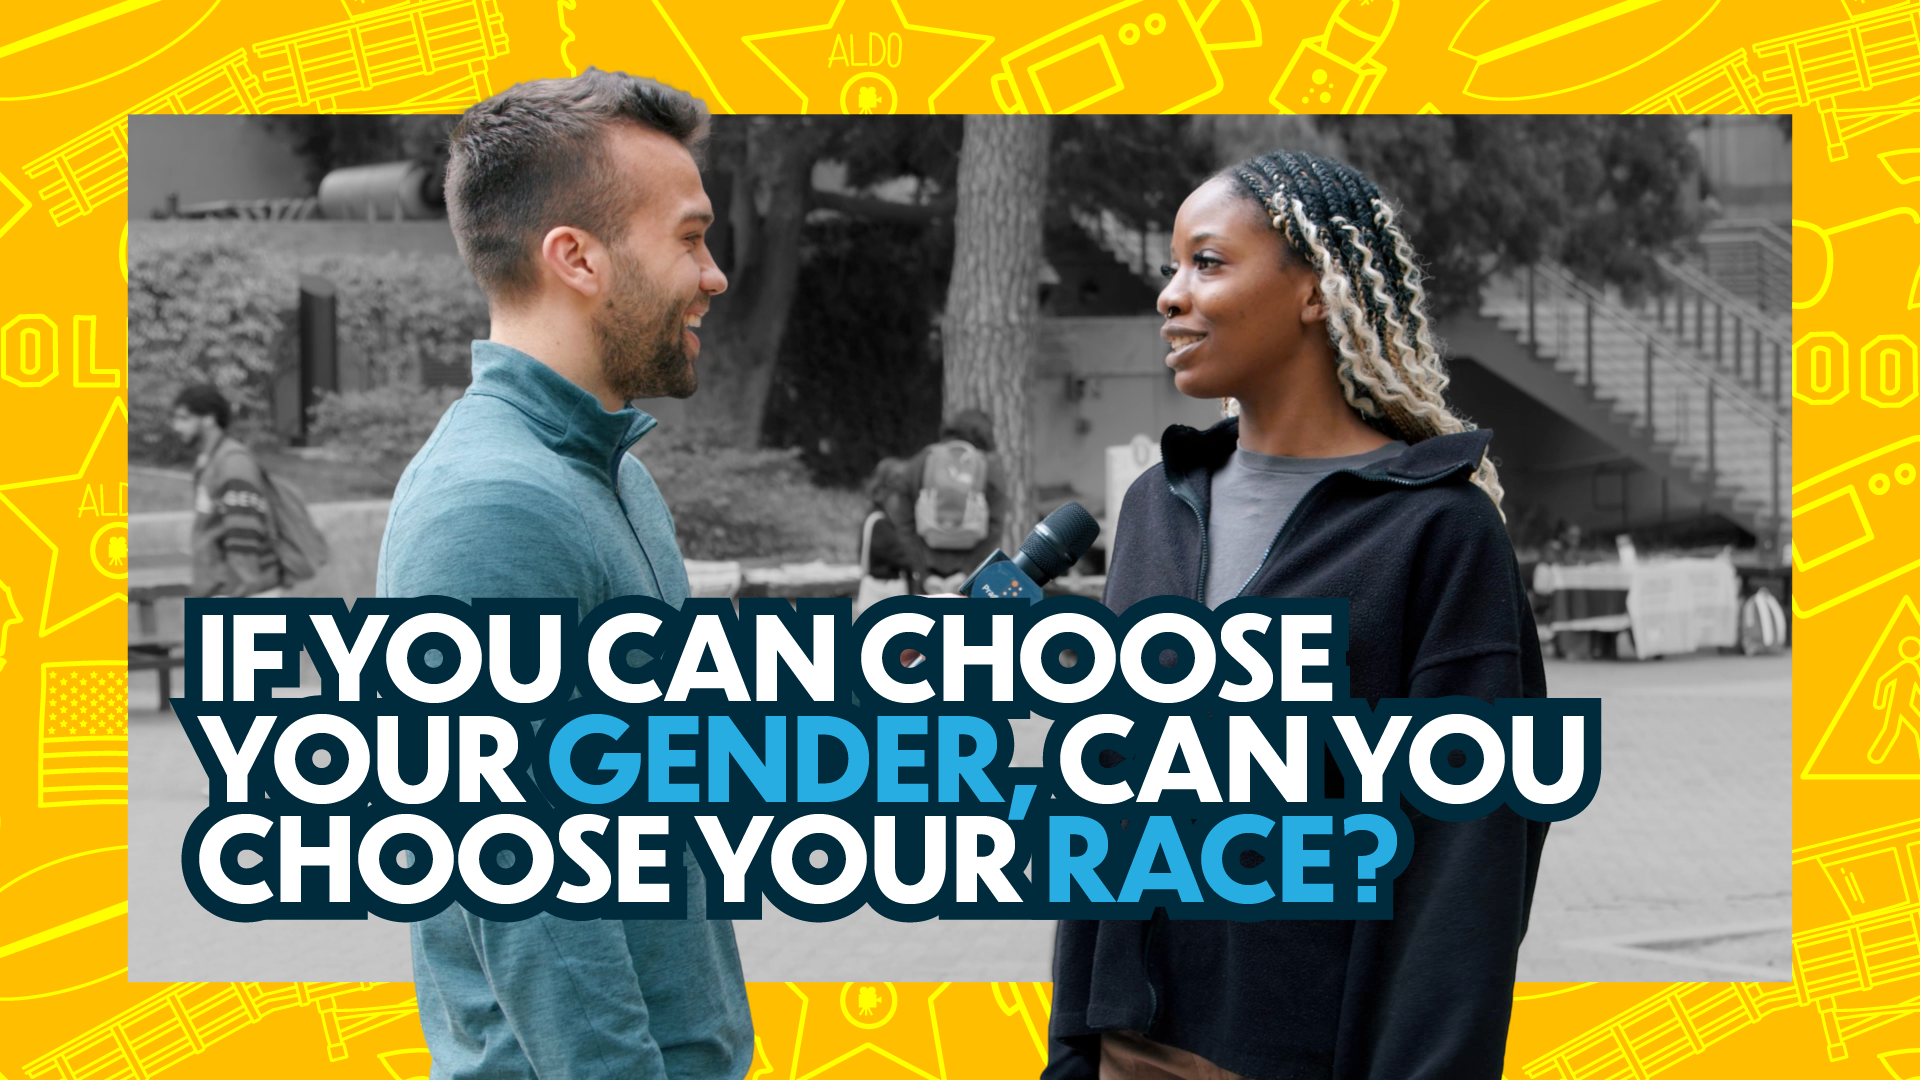 If You Can Choose Your Gender, Can You Choose Your Race?